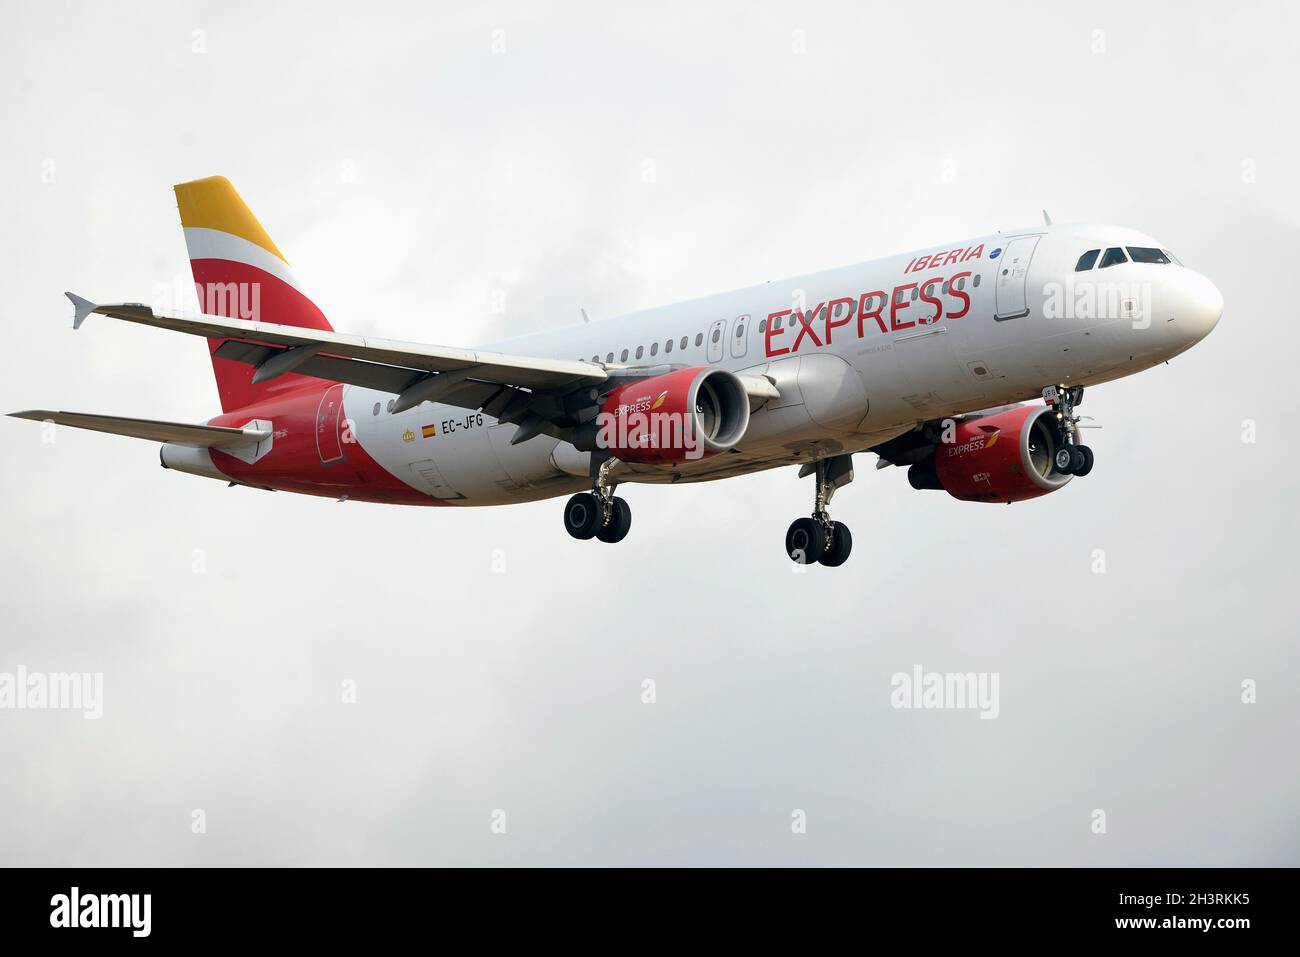 Airbus A320 plane of the Spanish company Iberia Express 